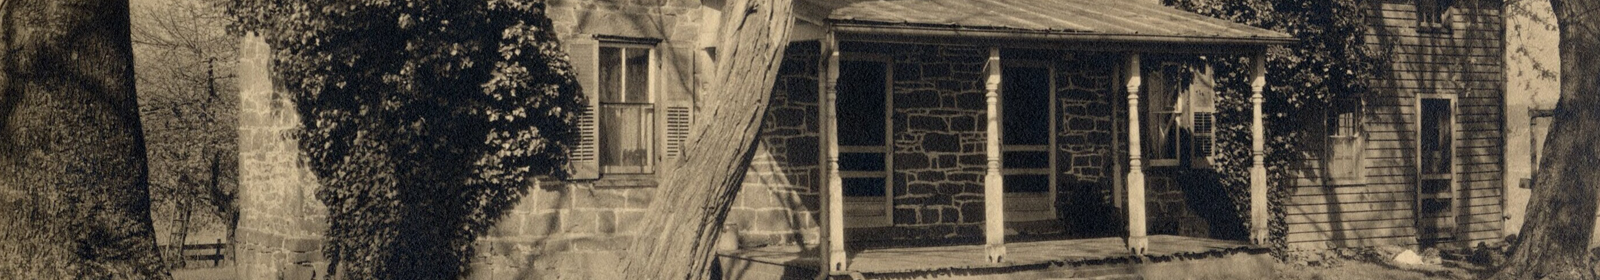 Detail from sepia-toned image of front porch of stone house